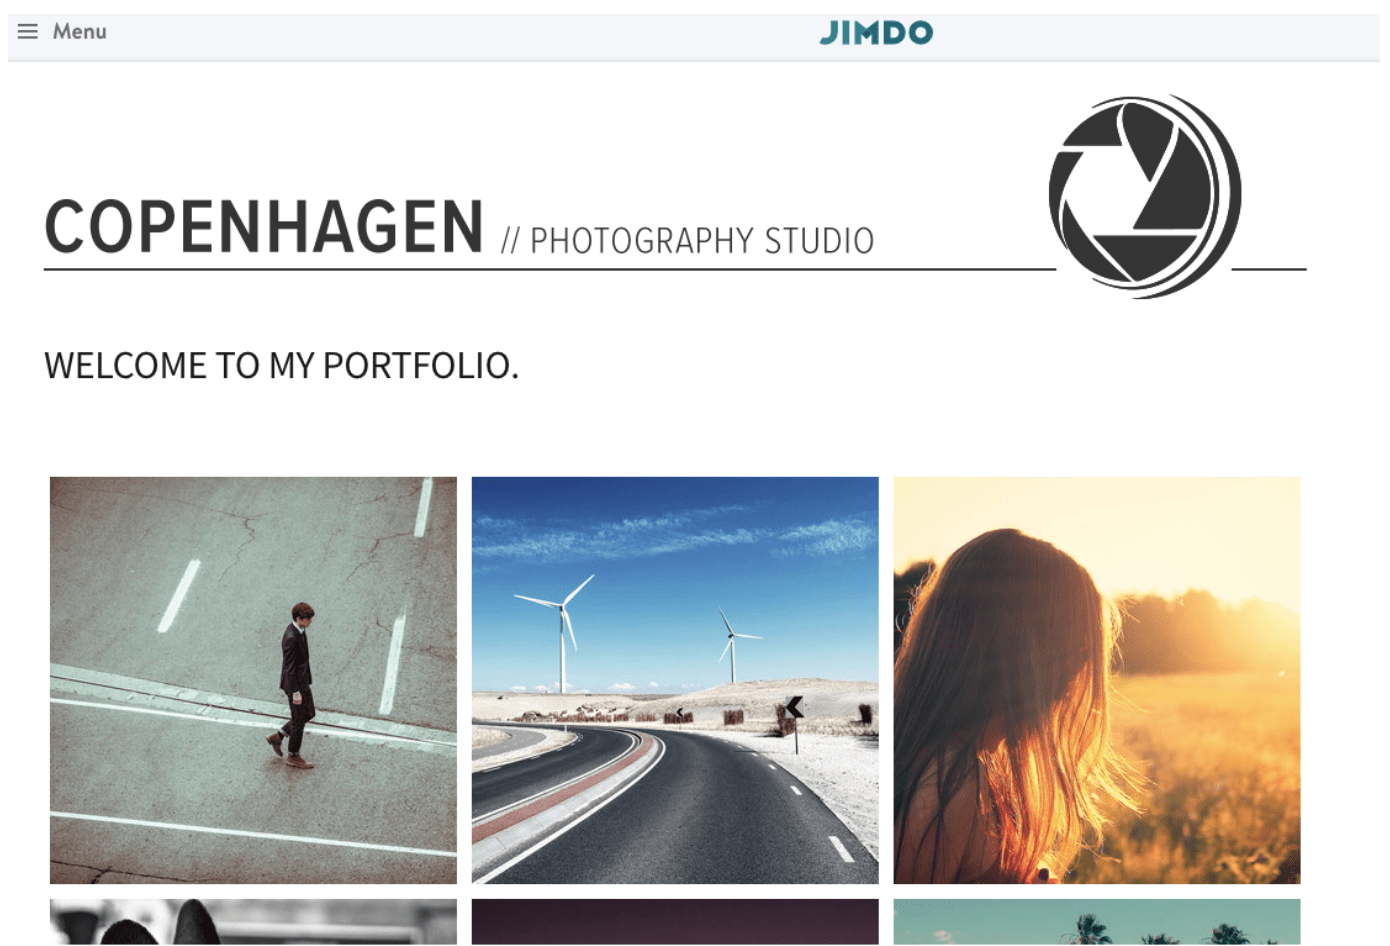 Jimdo template for photographers